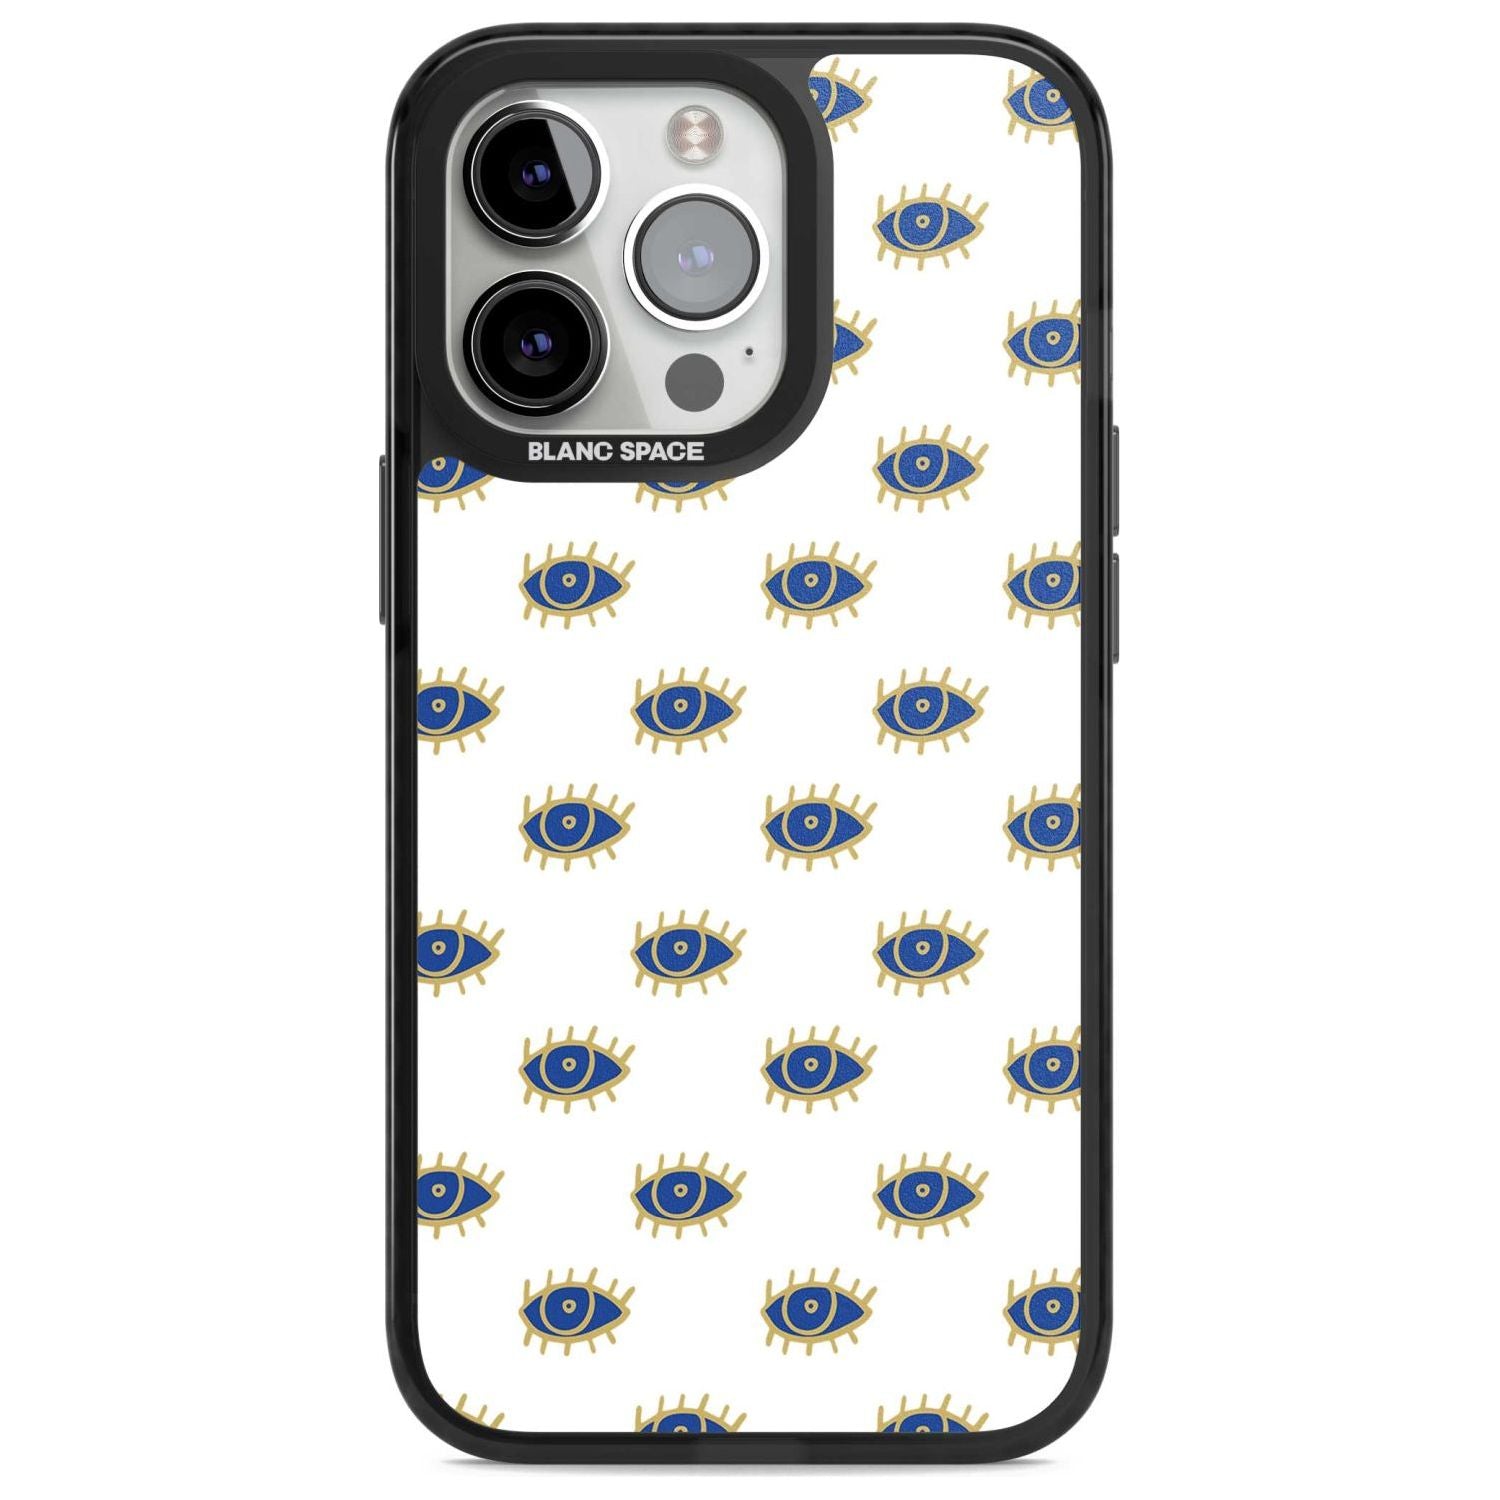 Gold Eyes Psychedelic Eyes Pattern Phone Case iPhone 15 Pro Max / Magsafe Black Impact Case,iPhone 15 Pro / Magsafe Black Impact Case,iPhone 14 Pro Max / Magsafe Black Impact Case,iPhone 14 Pro / Magsafe Black Impact Case,iPhone 13 Pro / Magsafe Black Impact Case Blanc Space